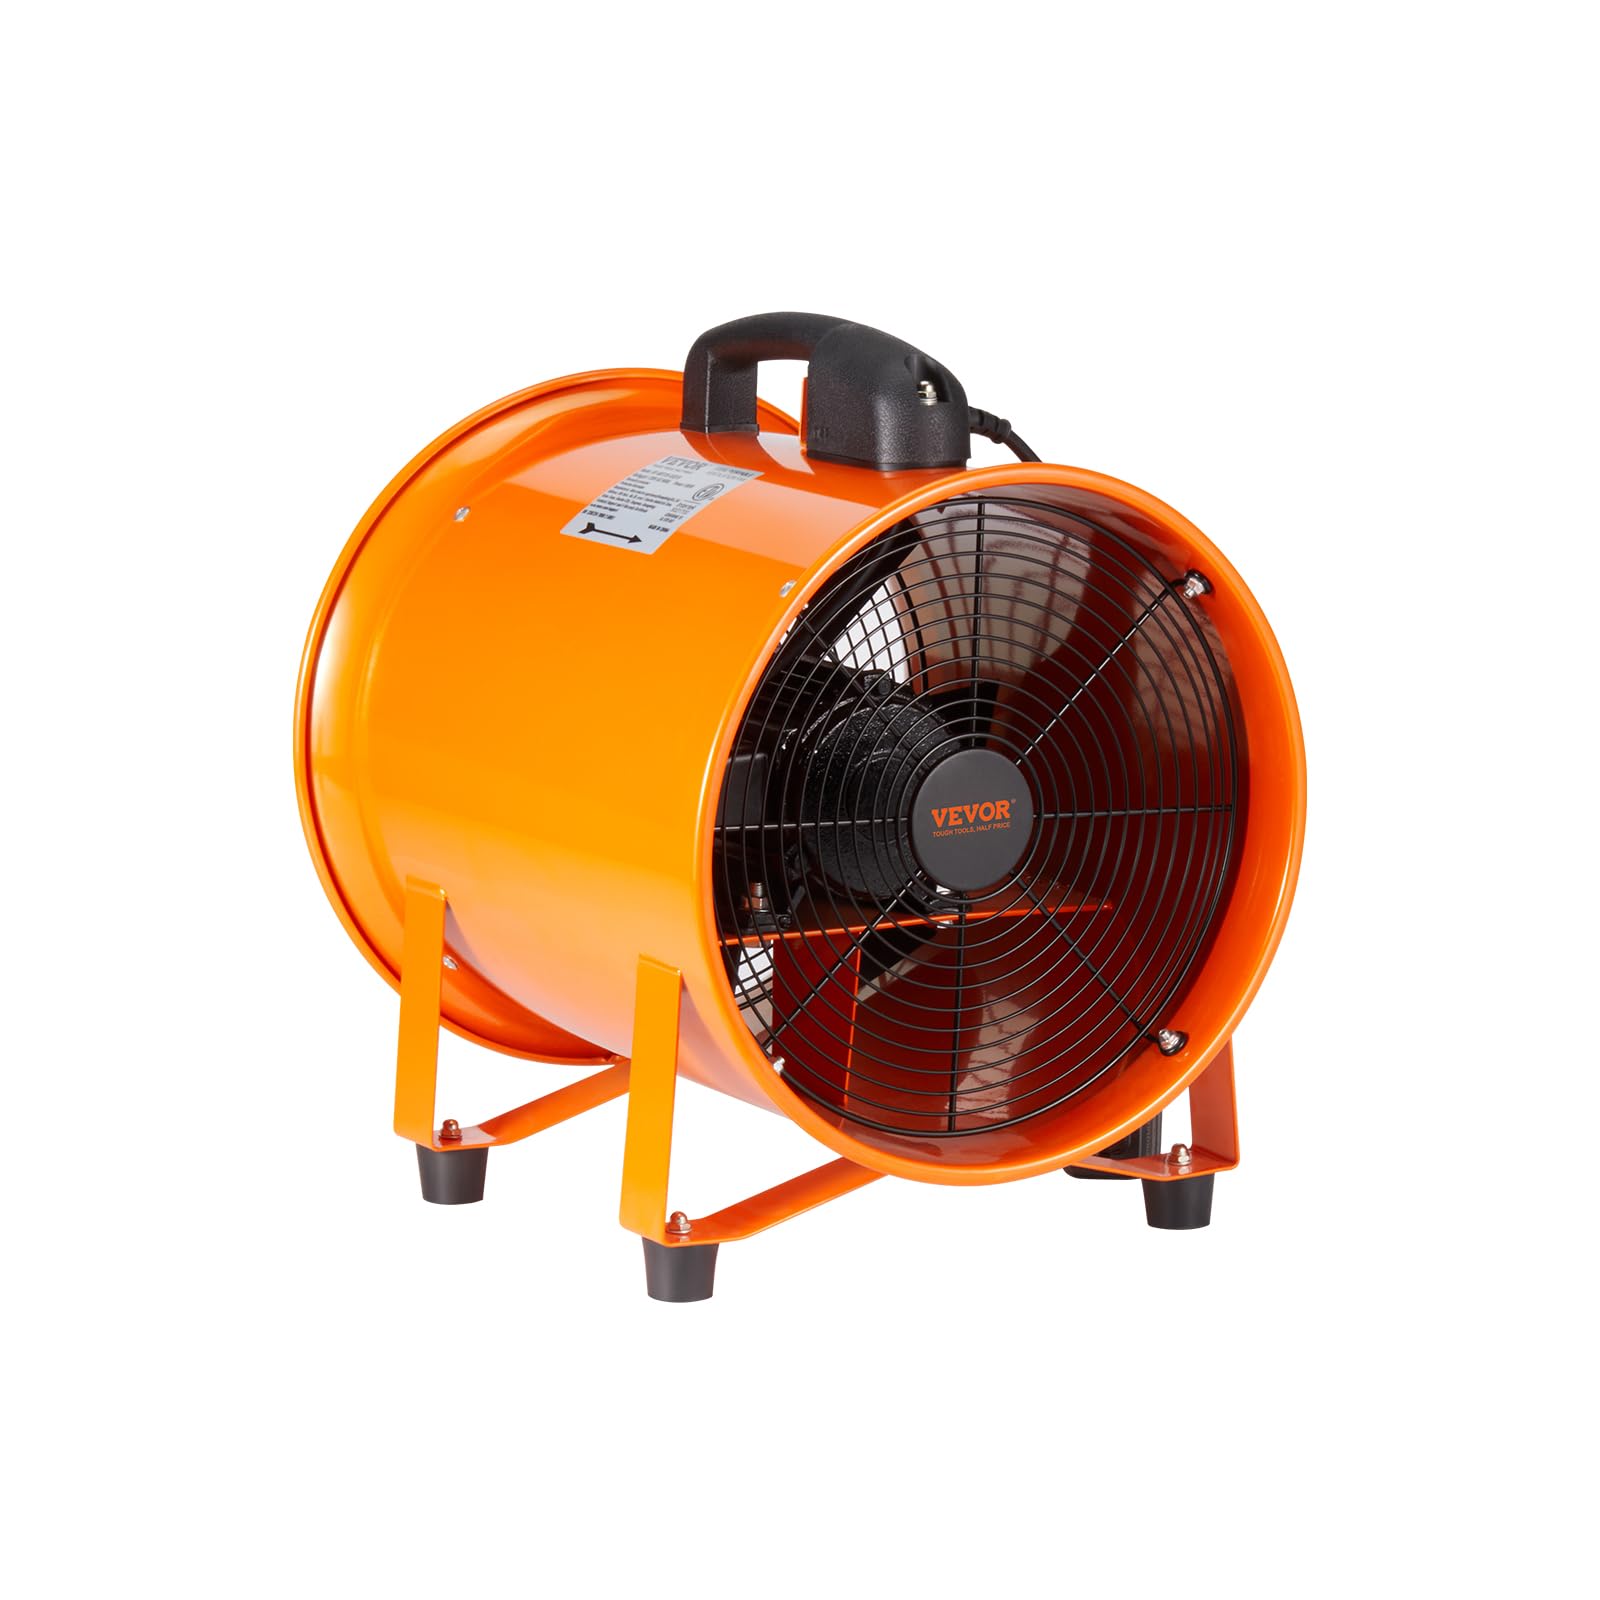 VEVOR 12 Inch Utility Blower Fan, 2 Speed 2894 CFM Heavy Duty Cylinder Axial Exhaust Fan with 33ft Duct Hose, Industrial Portable Ventilator for basements, warehouse, Workshop, or Confined Space